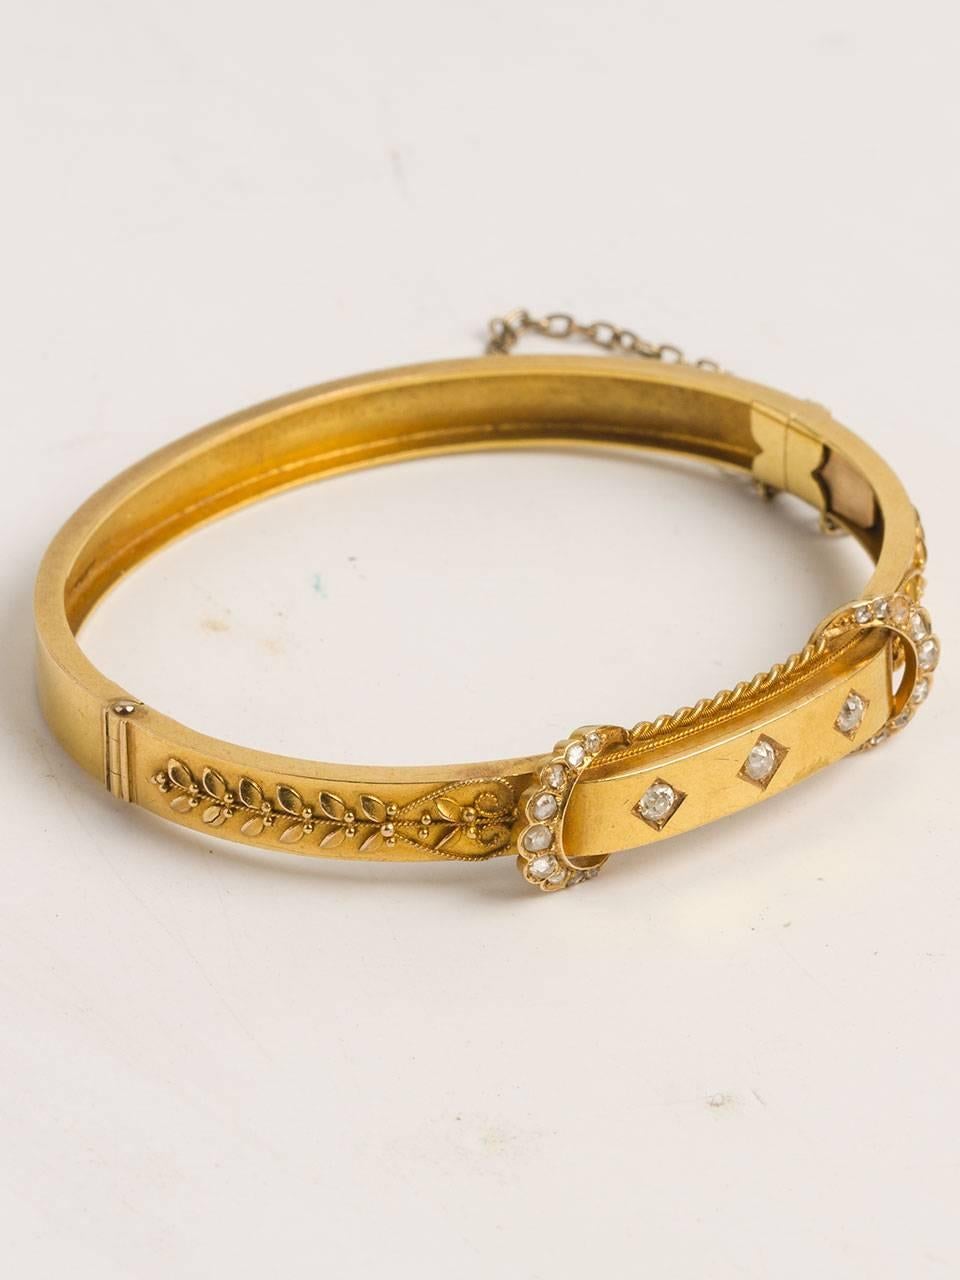 Victorian 15K yellow gold diamond hinged bangle bracelet. With applied floral details accented by finely twisted wire and 18 rose cut diamonds set in crescent shapes. 3 old mine cut diamonds sit across the top in separate little oblique squares.